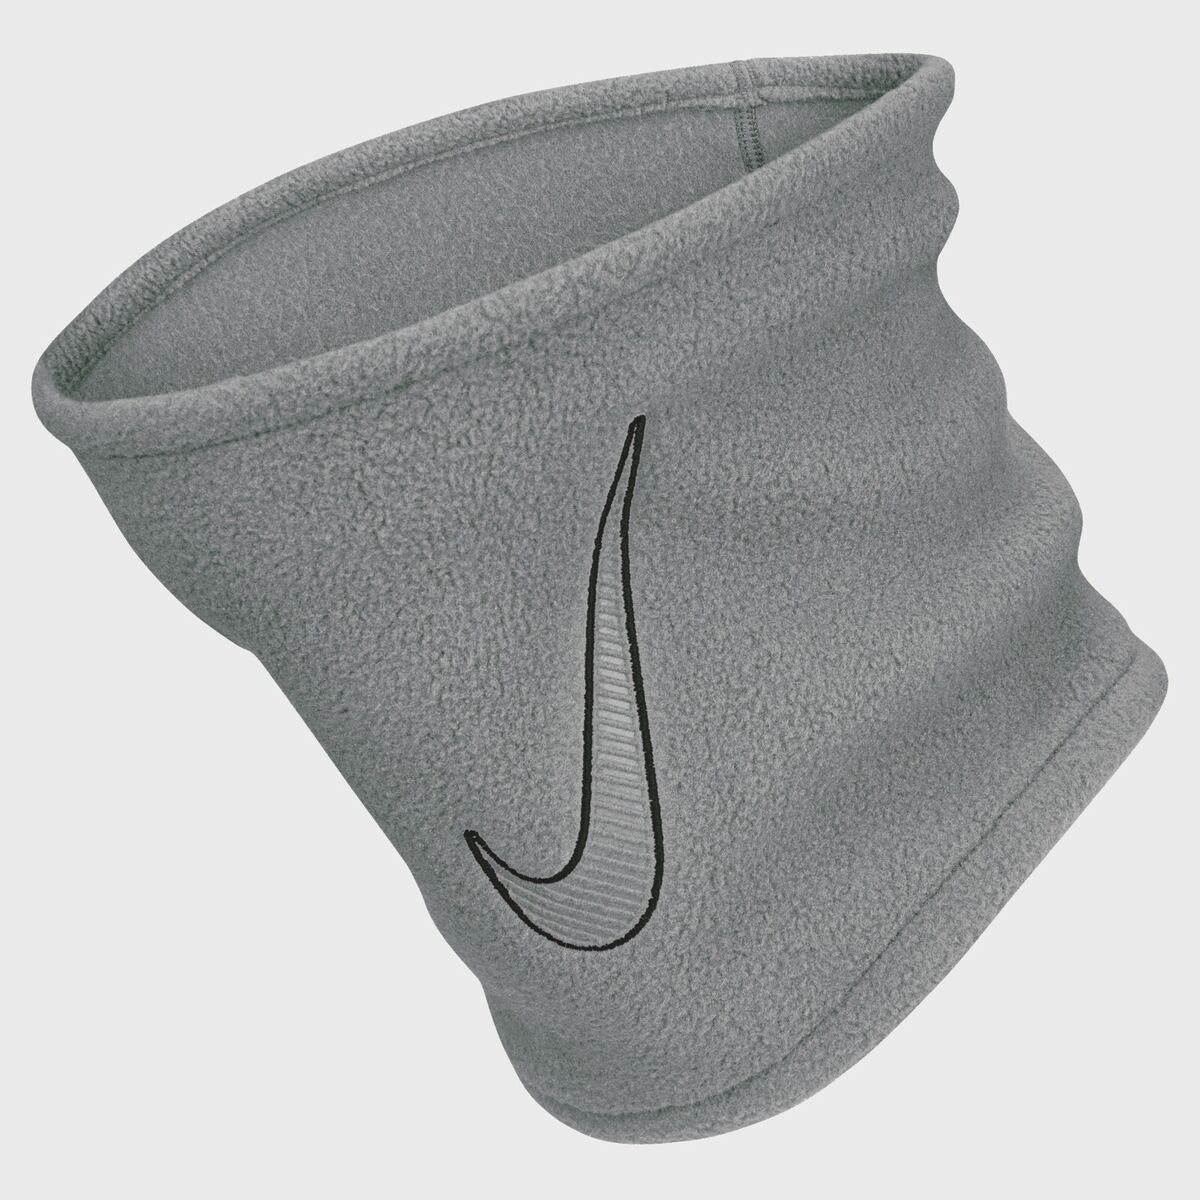 NIKE SNOOD NECK WARMER THERMA 360 STORM THERMAL GAITER SCARF FACE TUBE BLACK